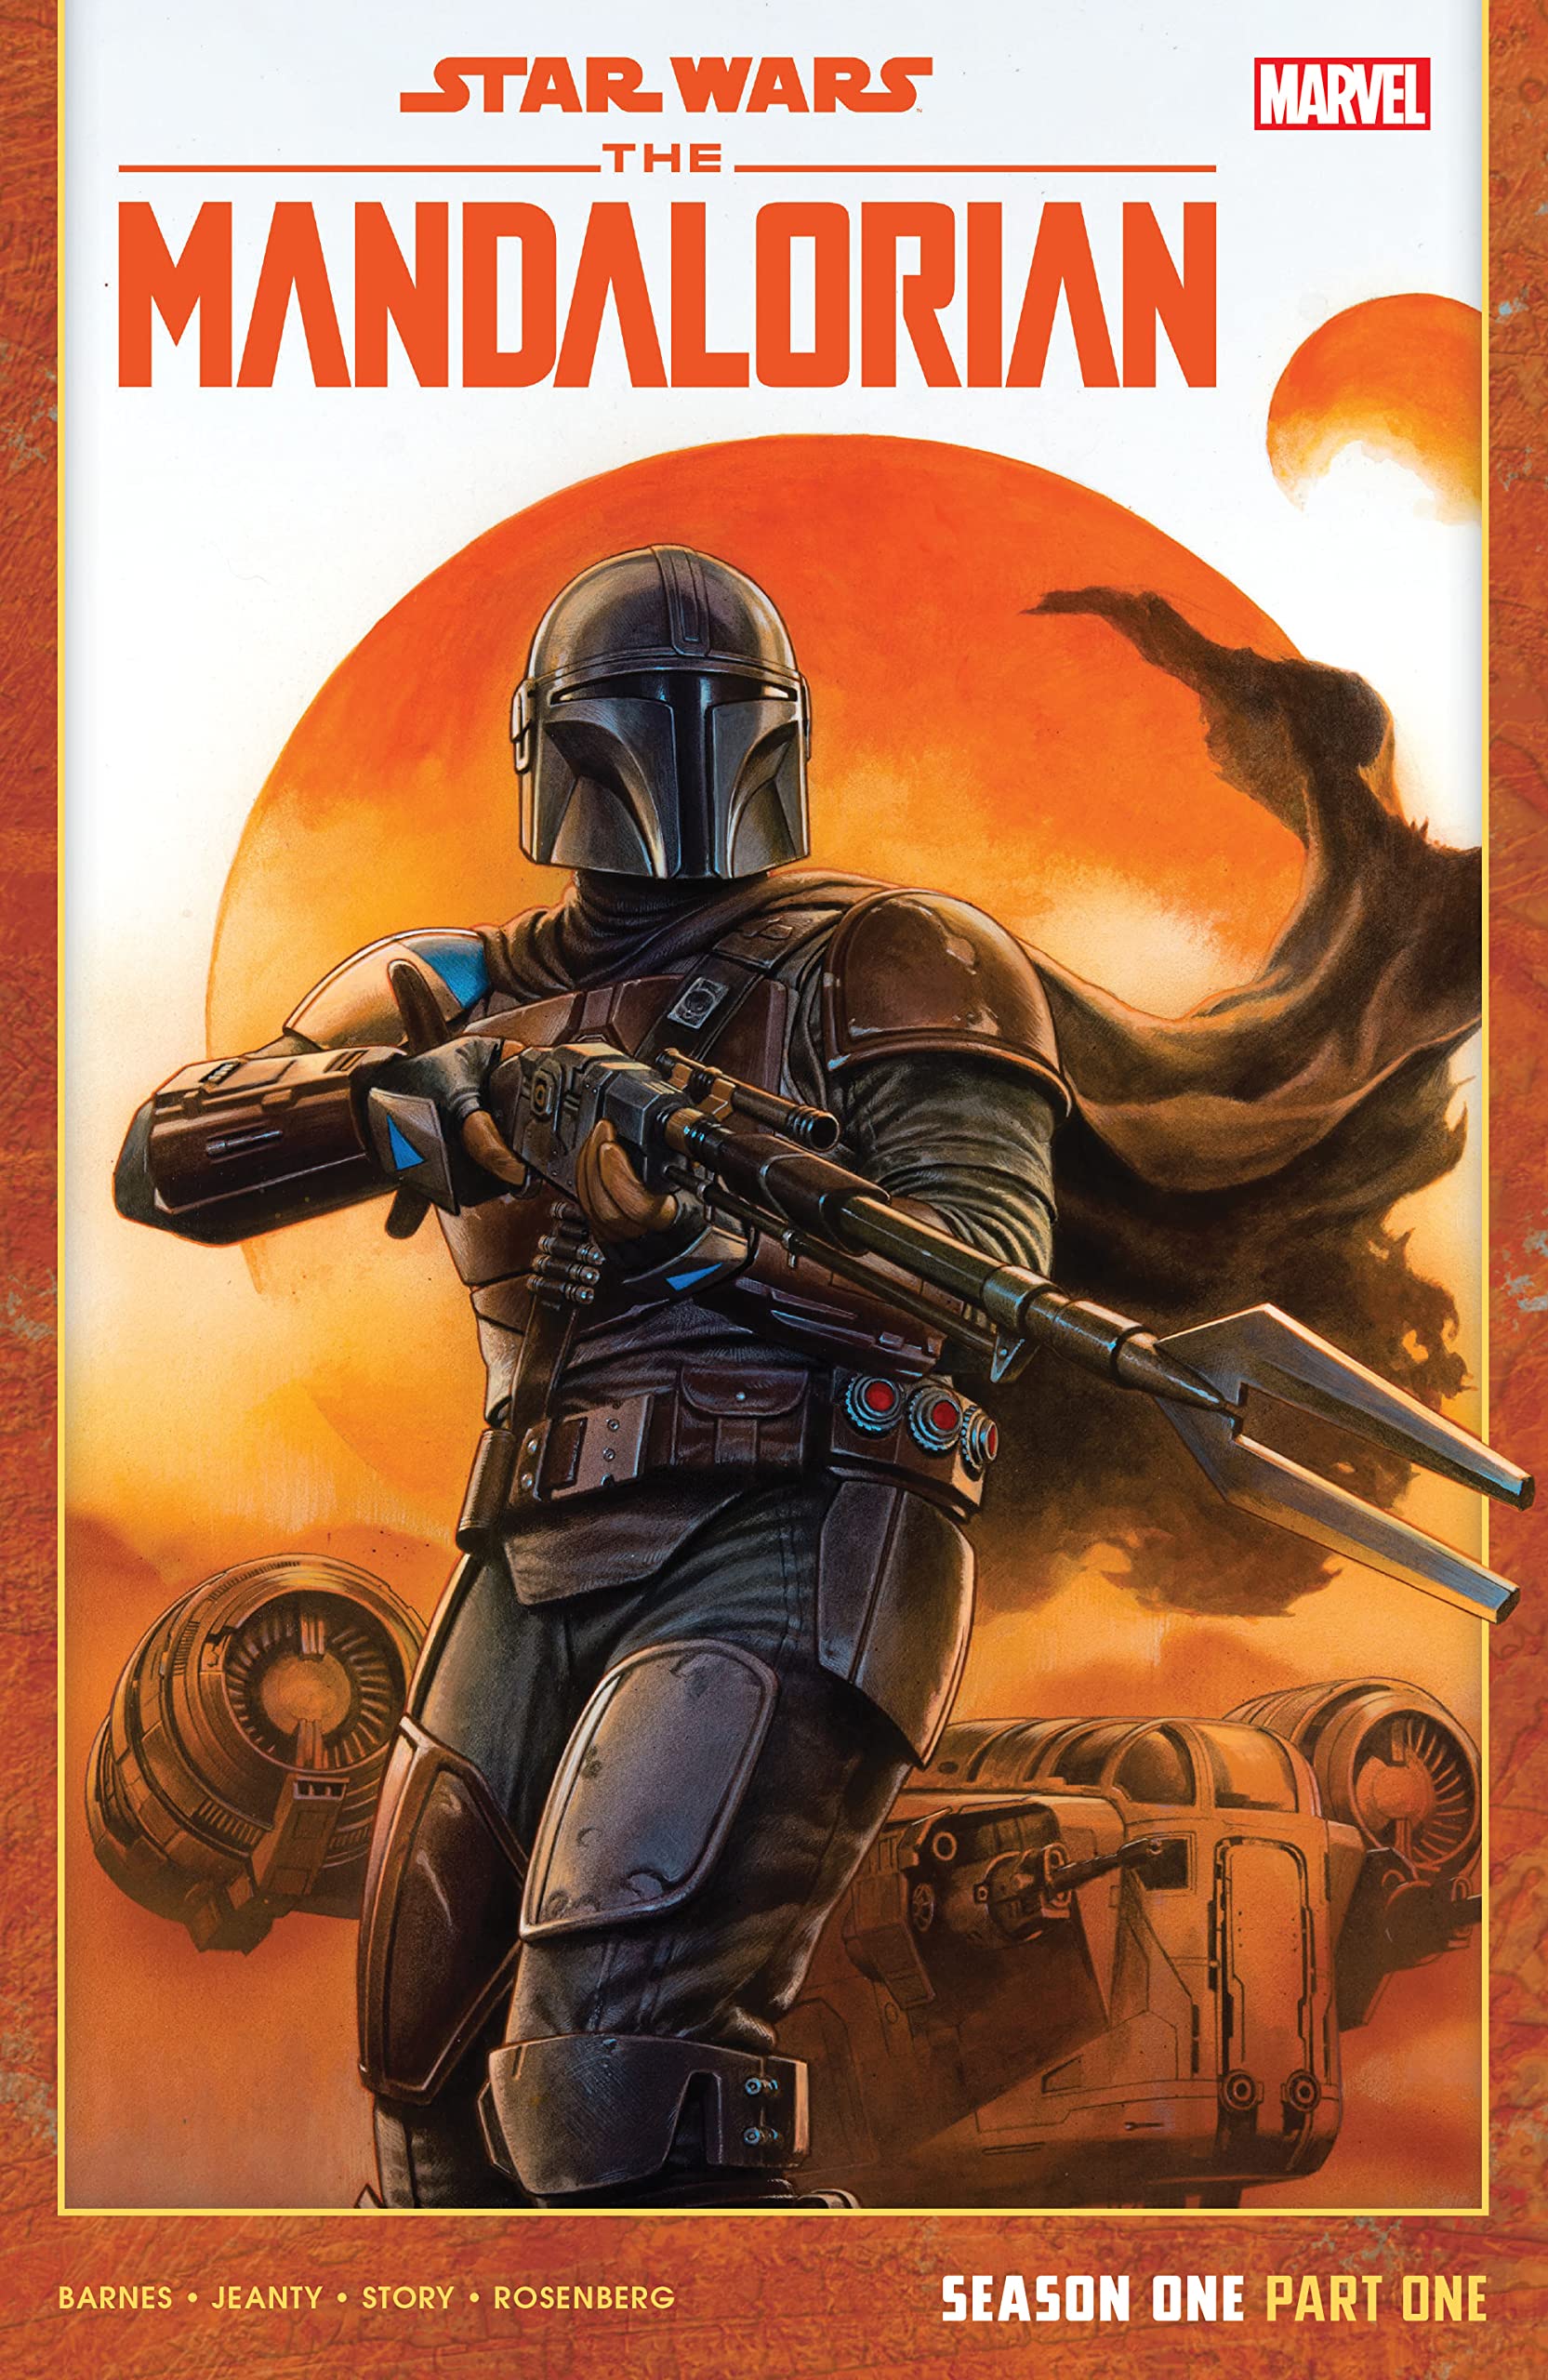 A Guide To Star Wars Mandalorian Lore For Beginners